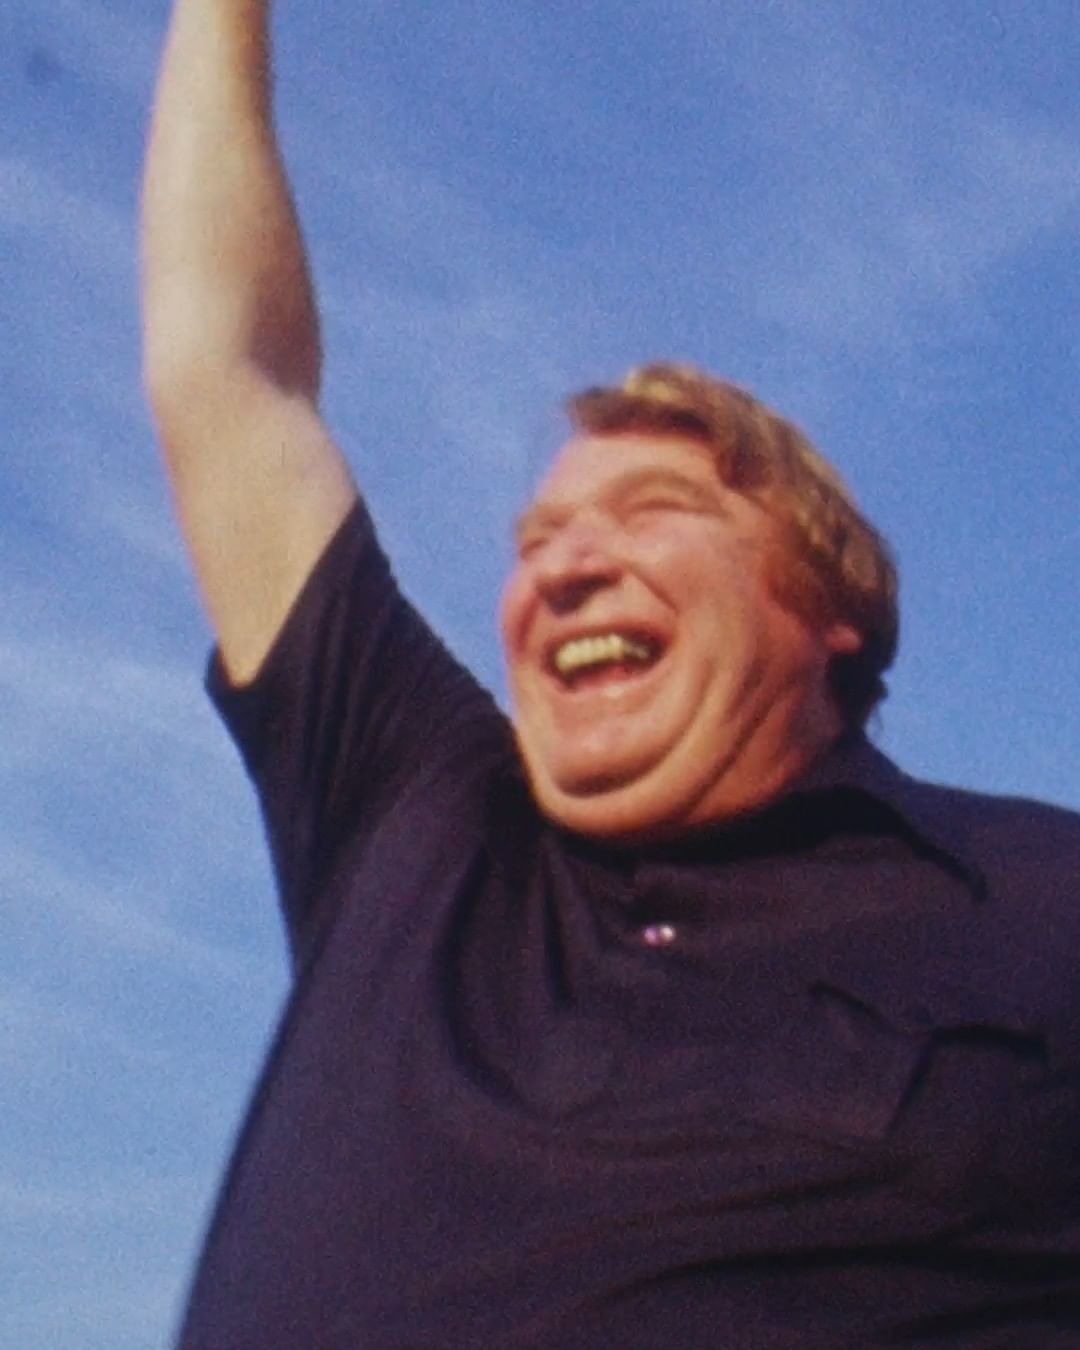 No one embodies real football more than Coach John Madden. His legacy will carry...